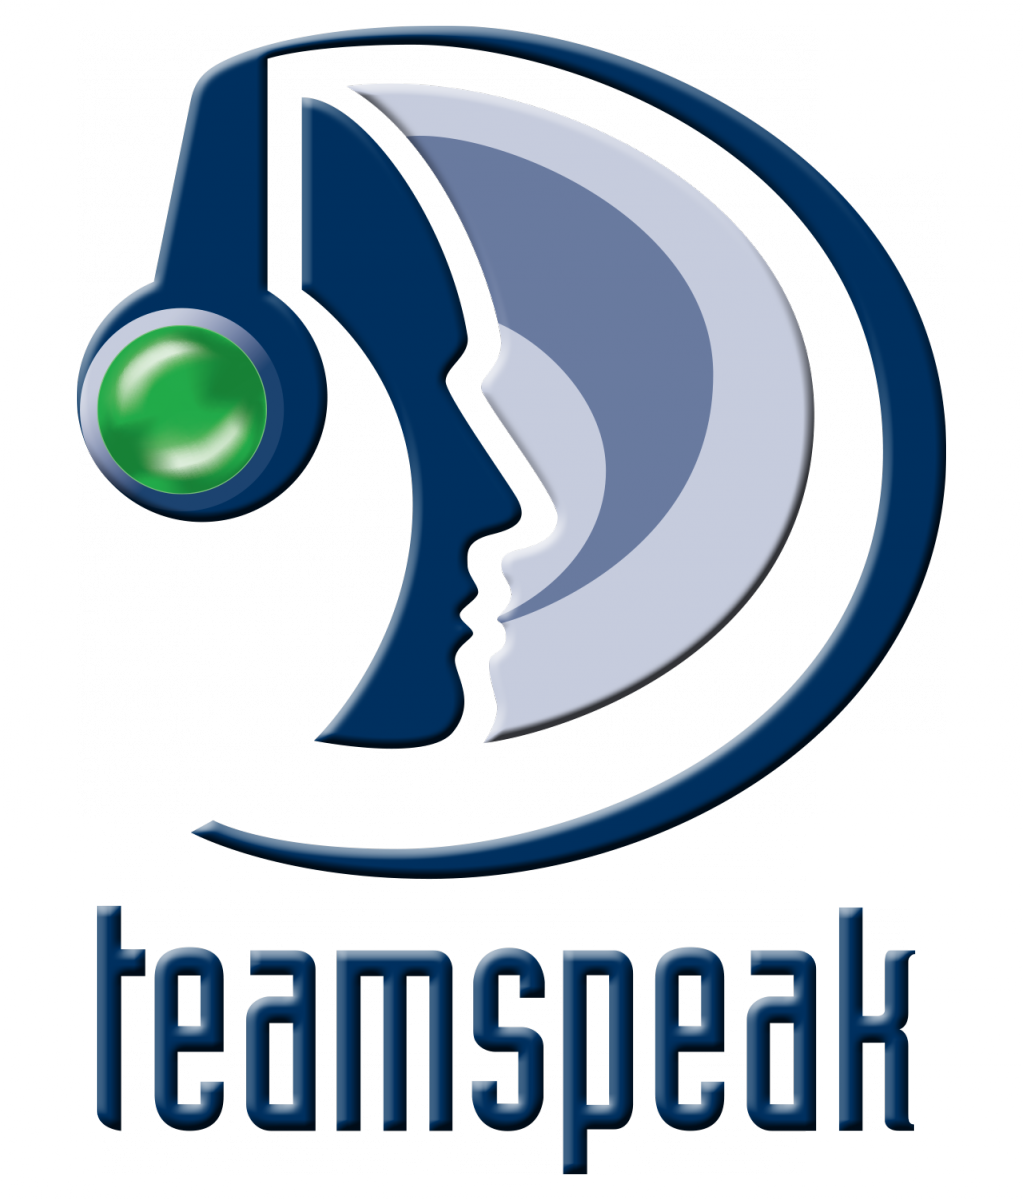 Pc Cheats For Command And Conquer Generals - Teamspeak 3 Server Banner (1023x1200)